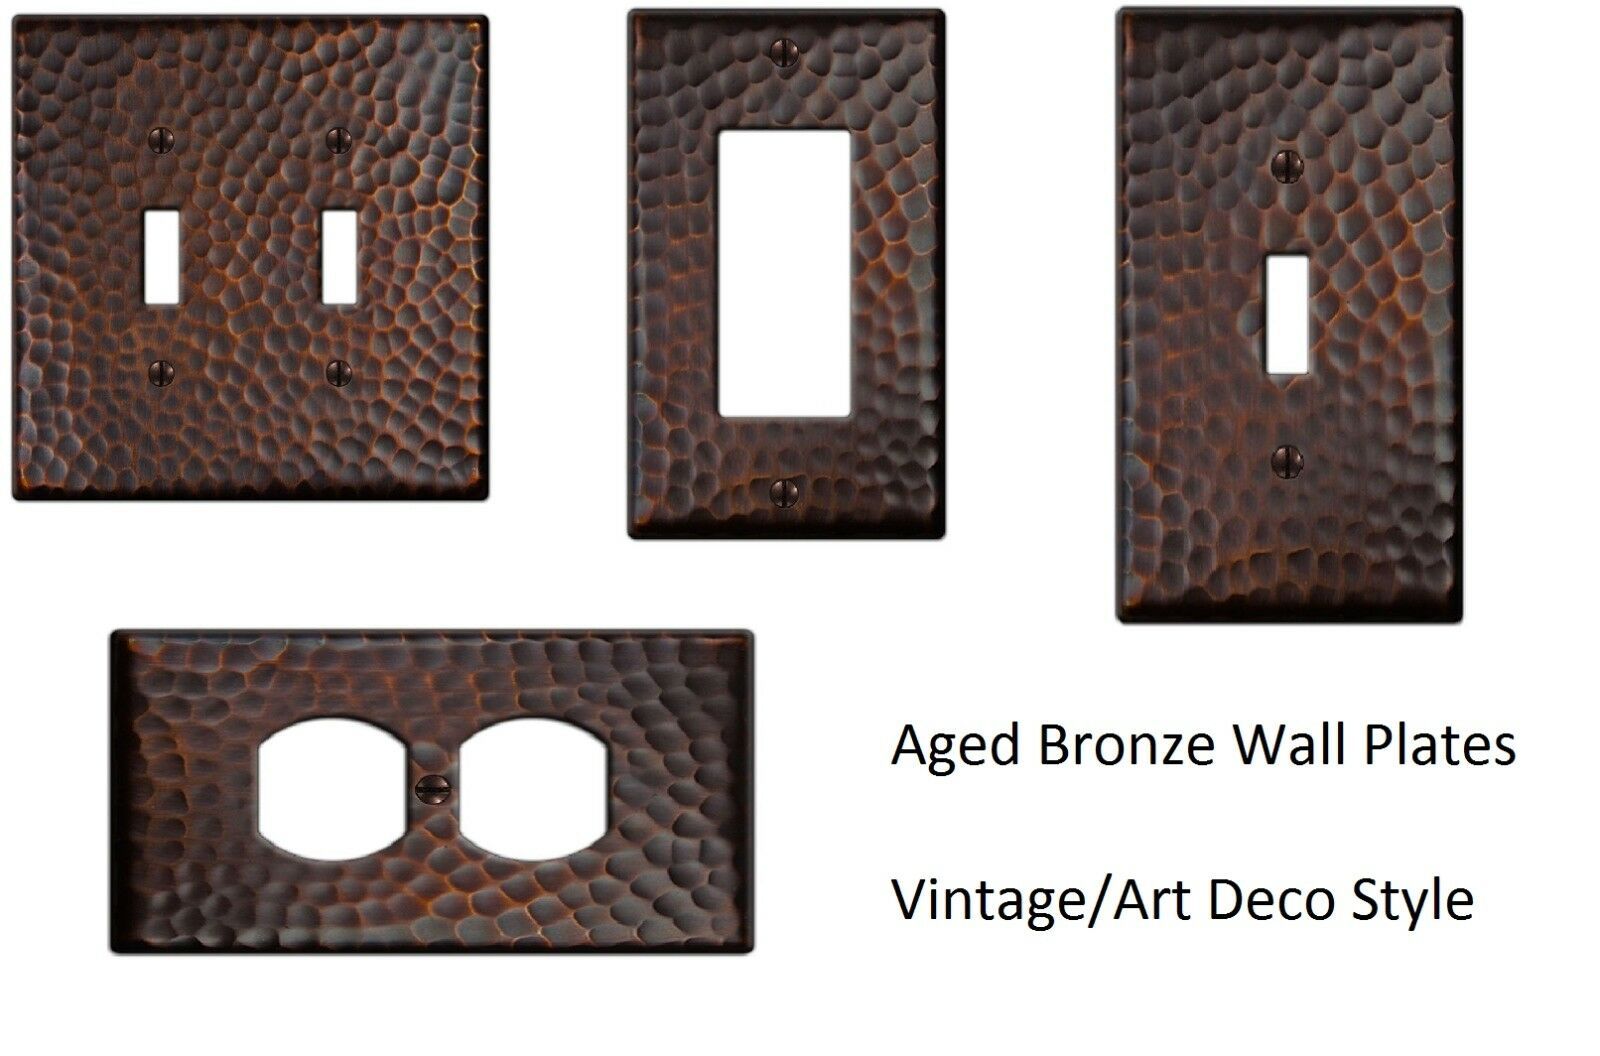 Wall Switch Cover Hammered Vintage Textured Outlet Toggle Bronze Plates - $5.49 - $6.45